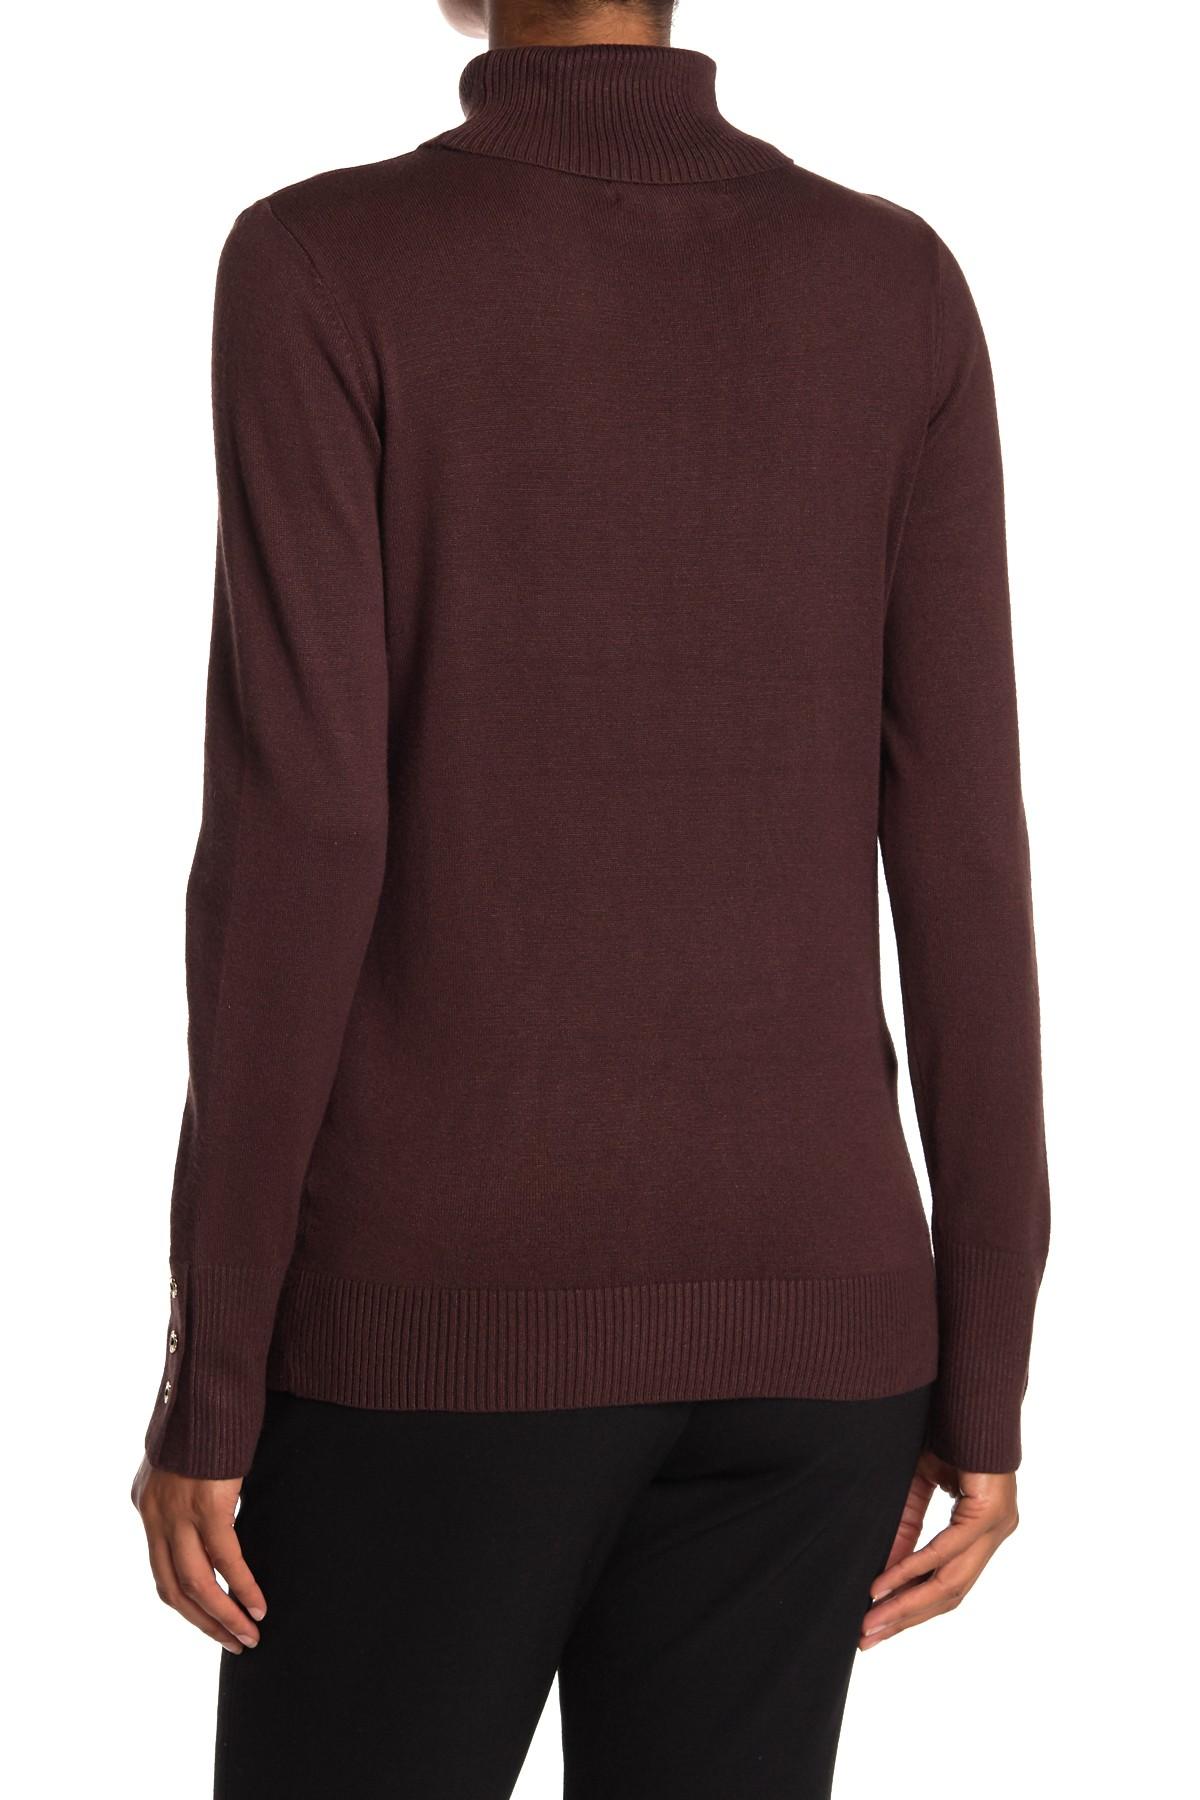 Joseph A Synthetic Turtleneck Button Sleeve Pullover Sweater in Purple ...